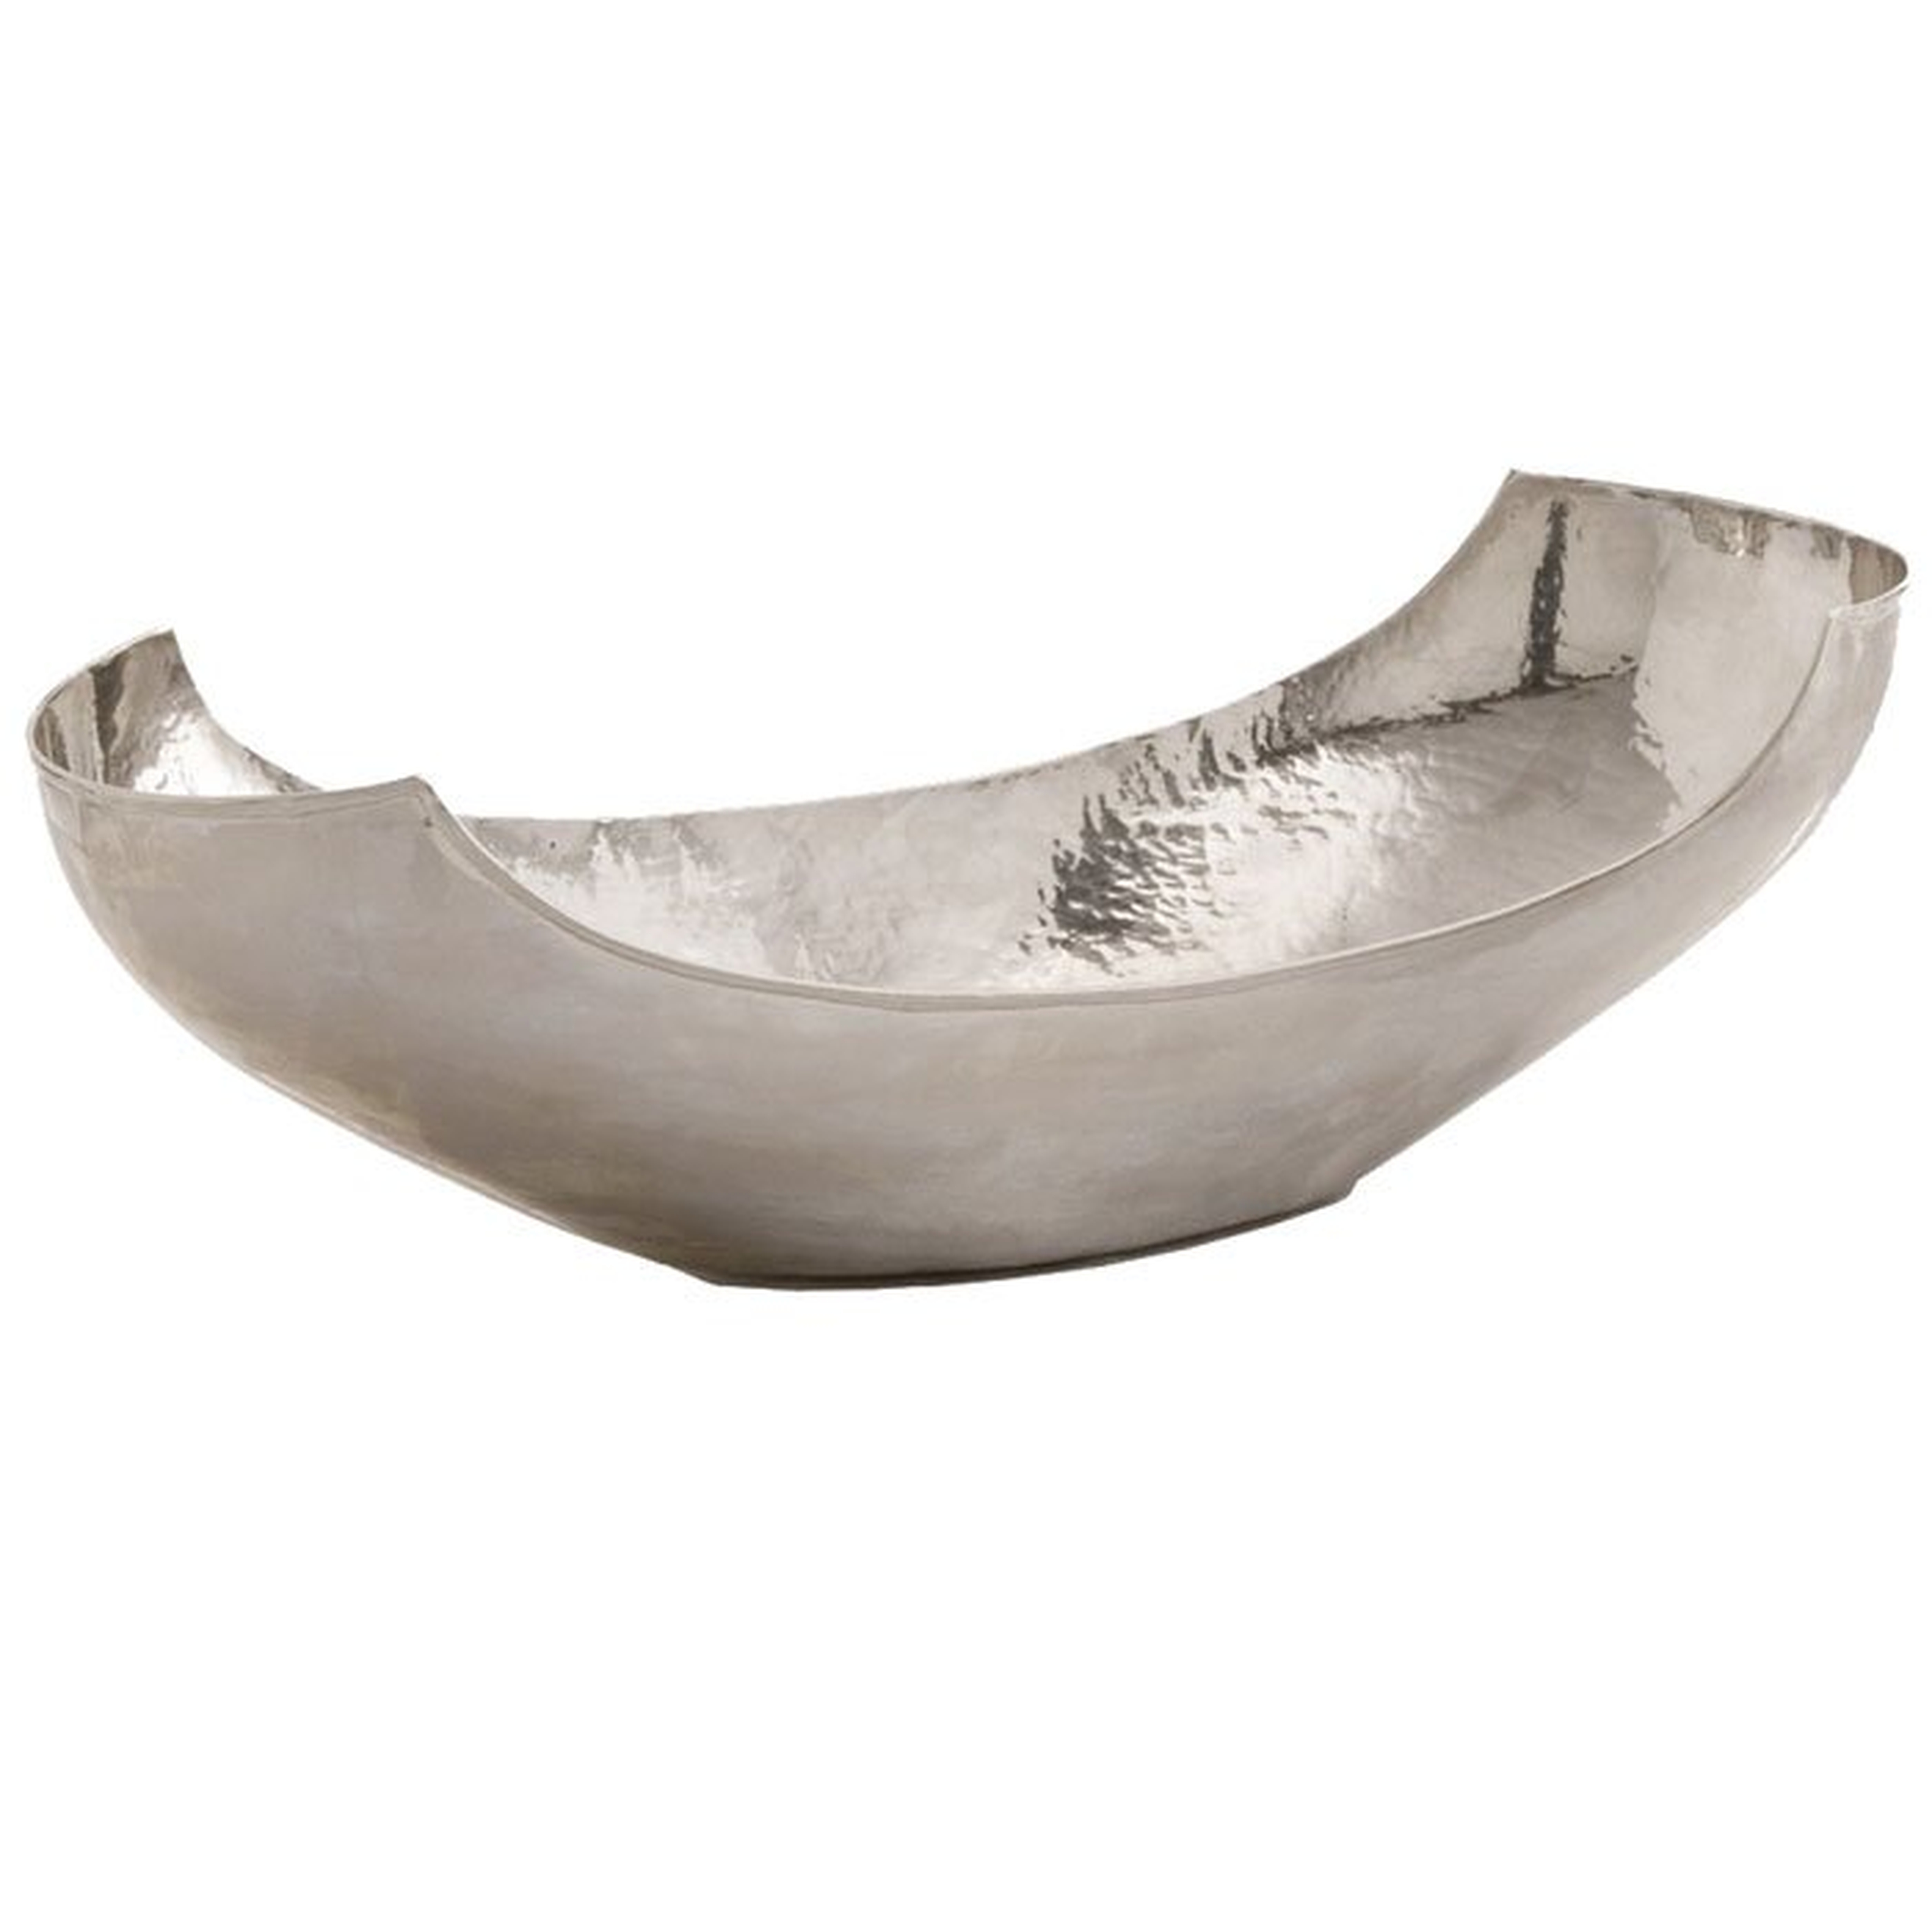 ARTERIORS Swain Metal Abstract Glam Decorative Bowl in Antique Silver - Perigold